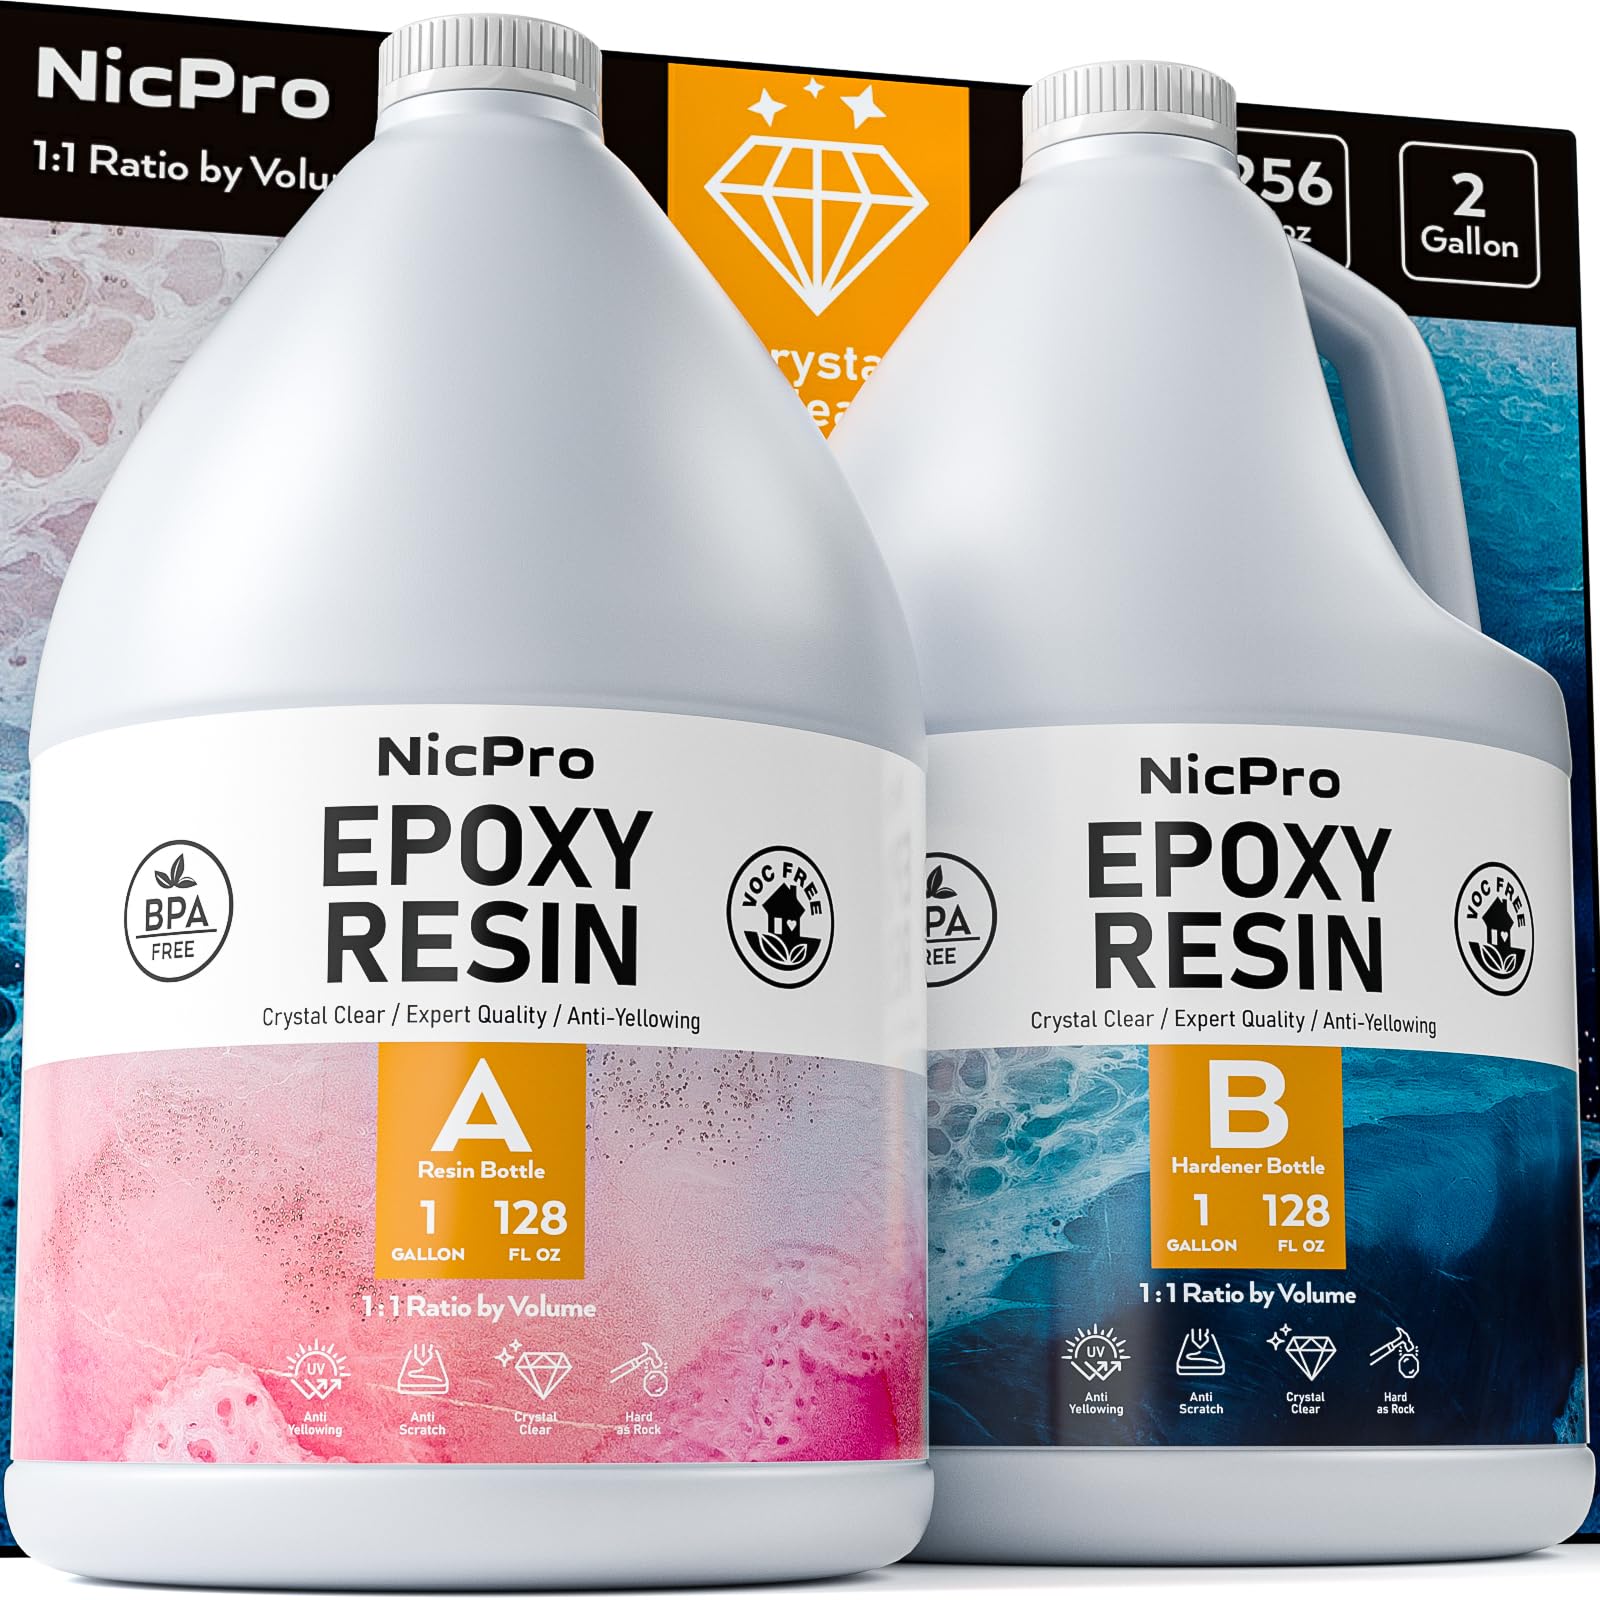 Epoxy Resin 2 Gallon - Crystal Clear Epoxy Resin Kit - Self-Leveling,  High-Glossy, No Yellowing, No Bubbles Casting Resin Perfect for Crafts,  Table